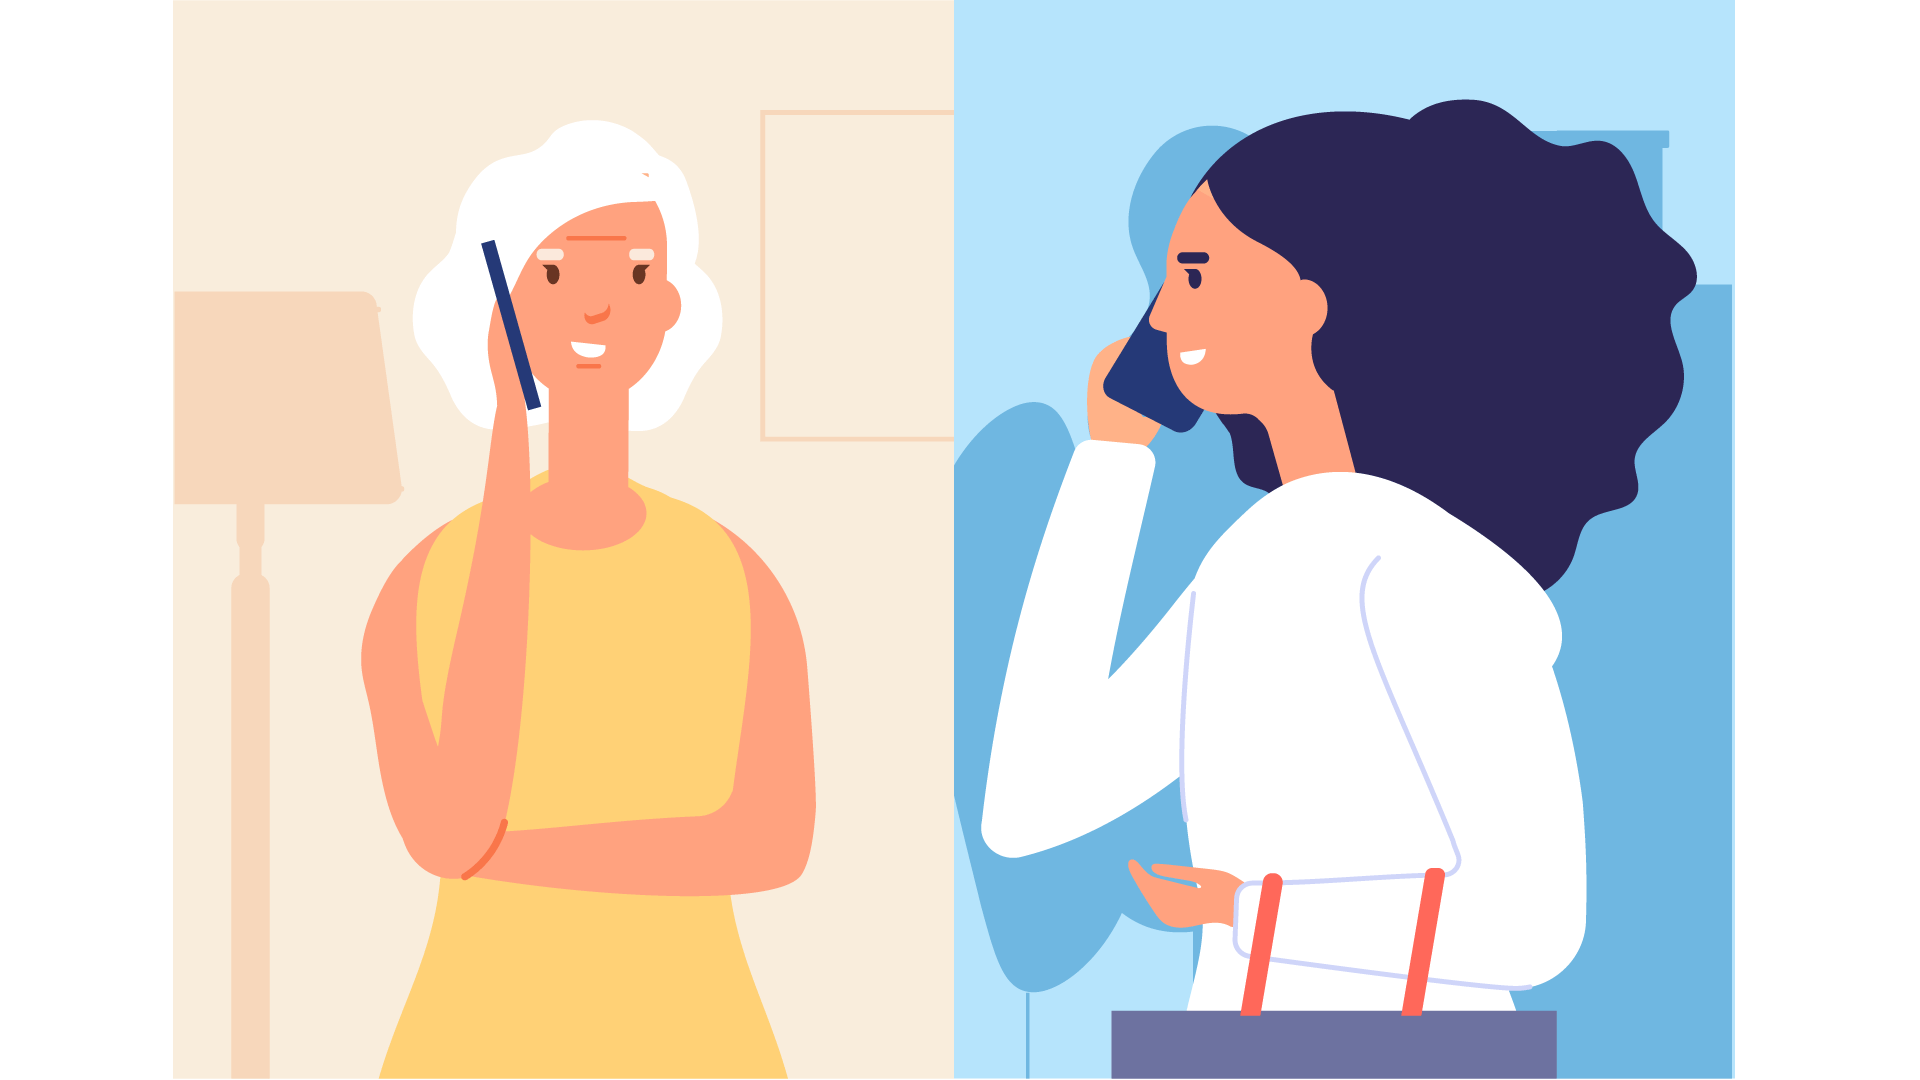 Two people calling